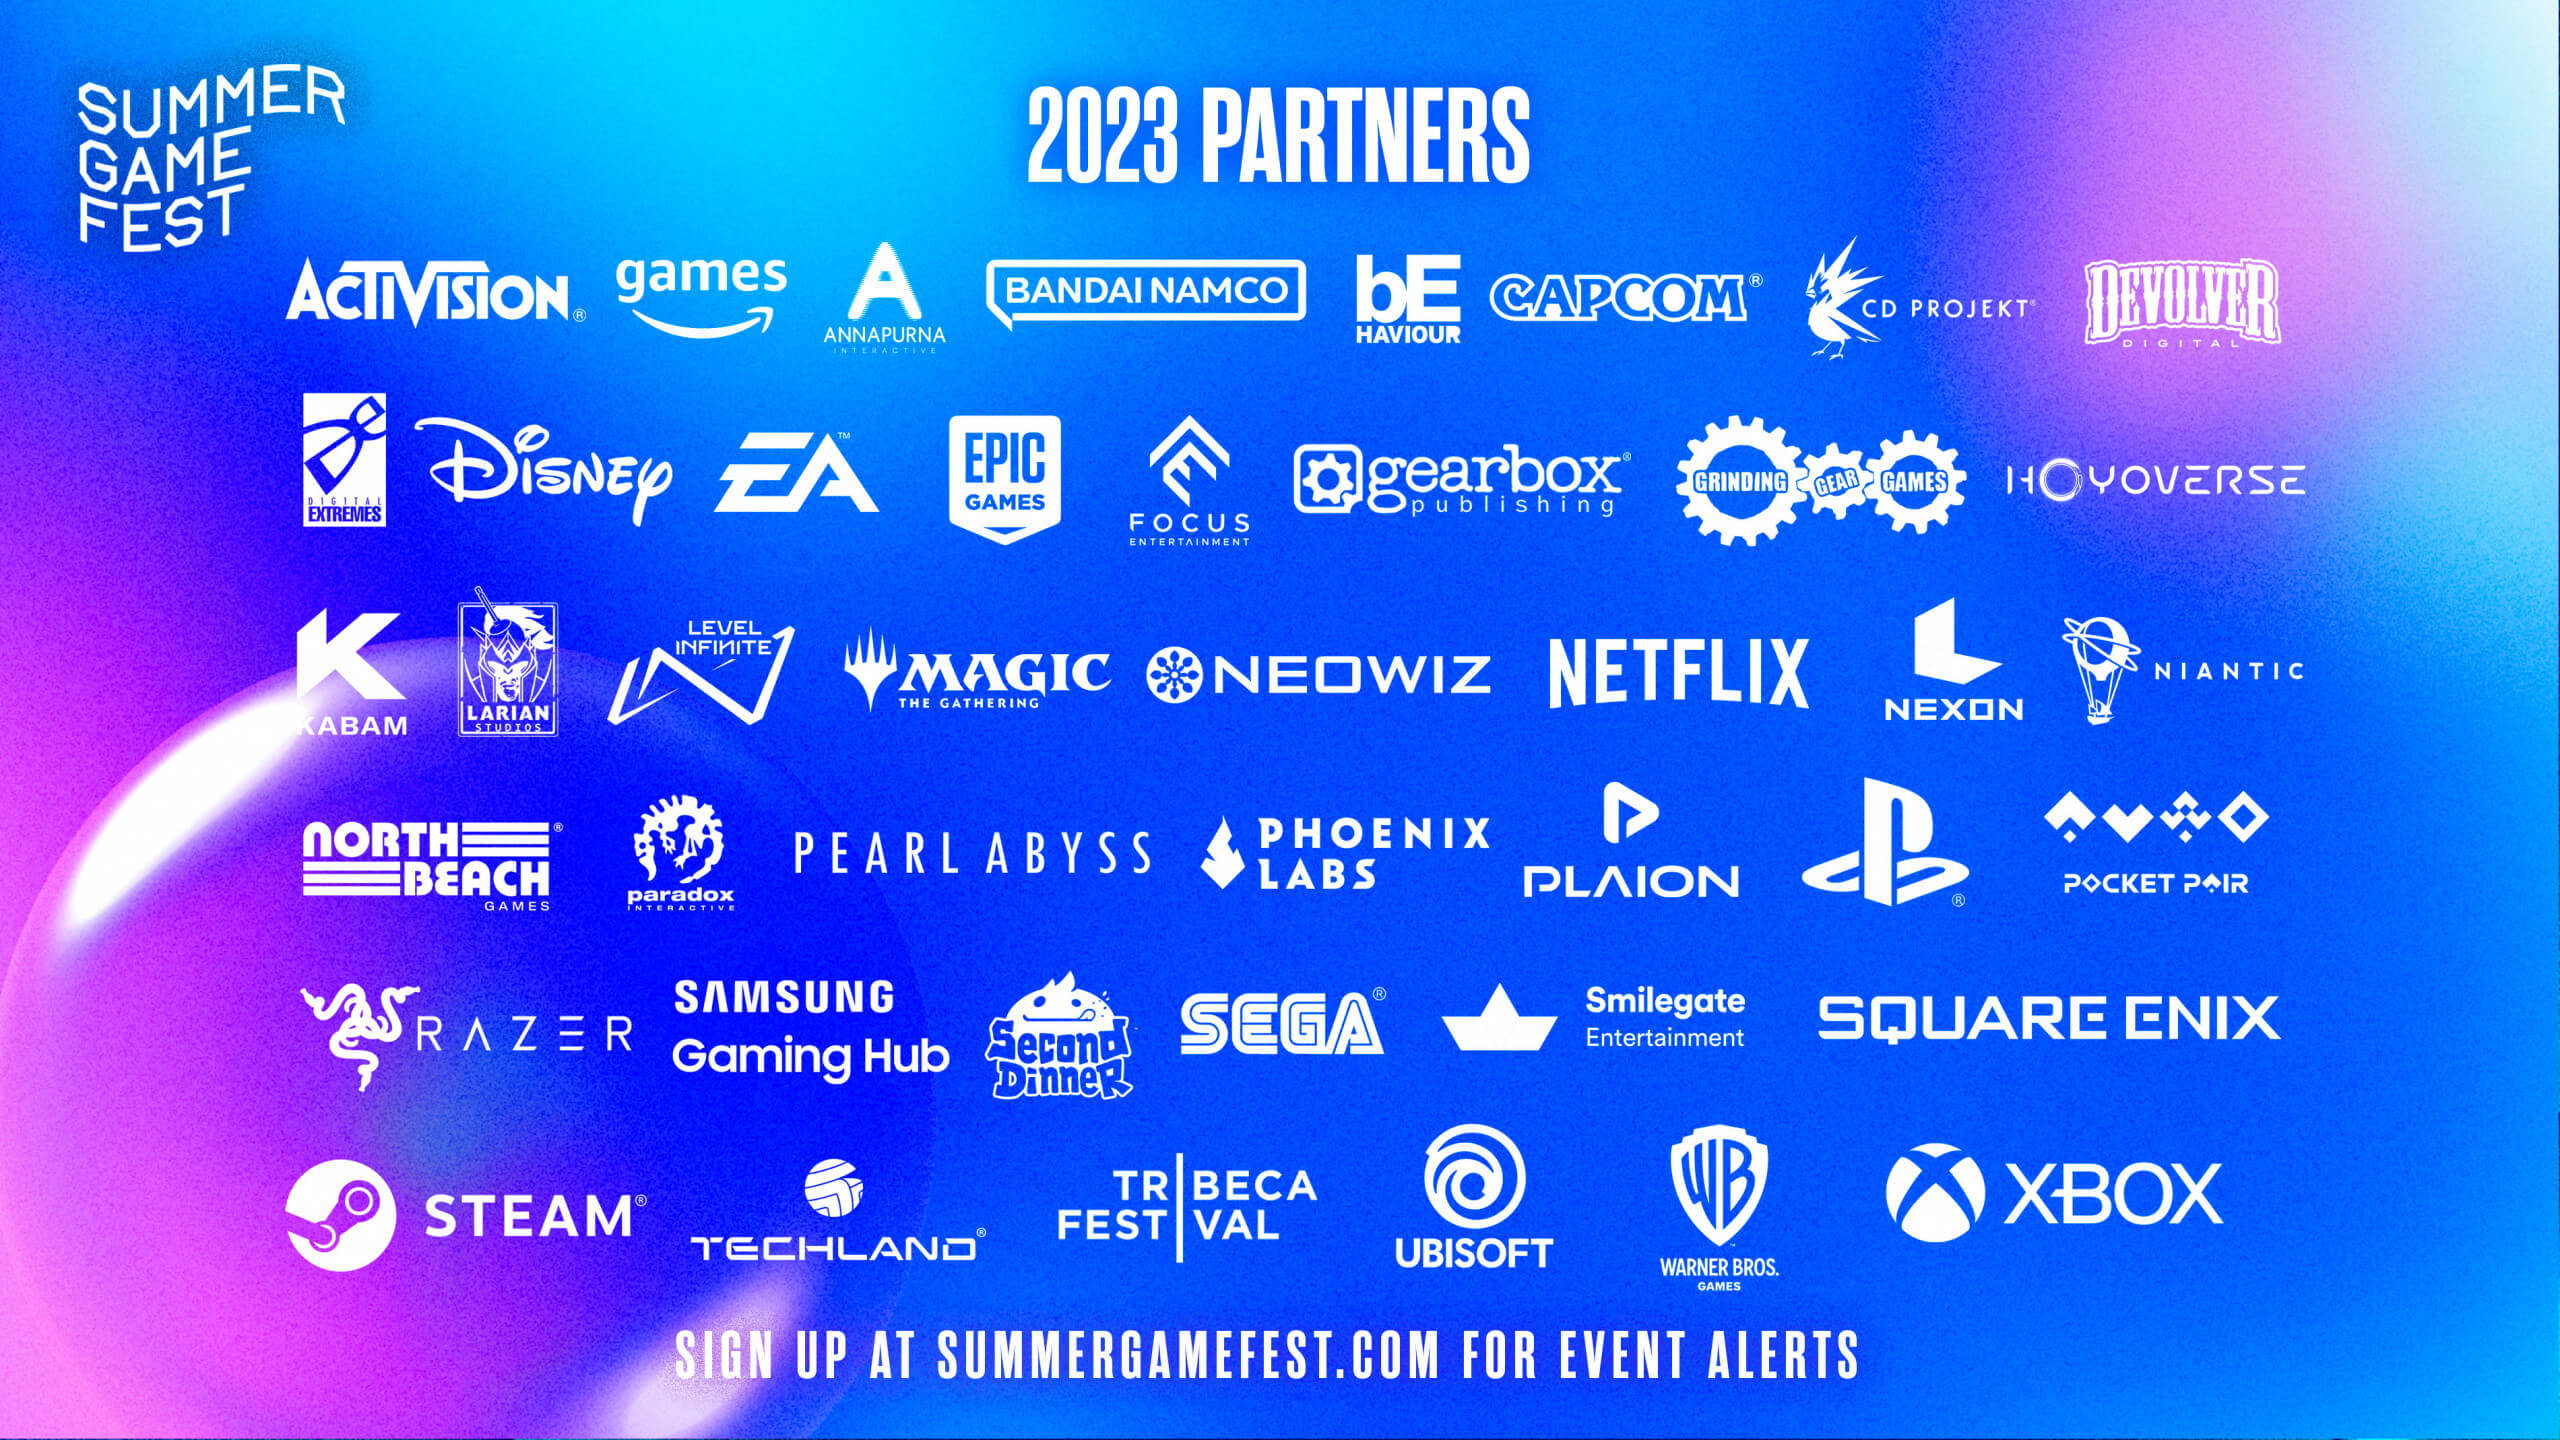 a collection of logos from all the companies participating in Summer Game Fest 2023